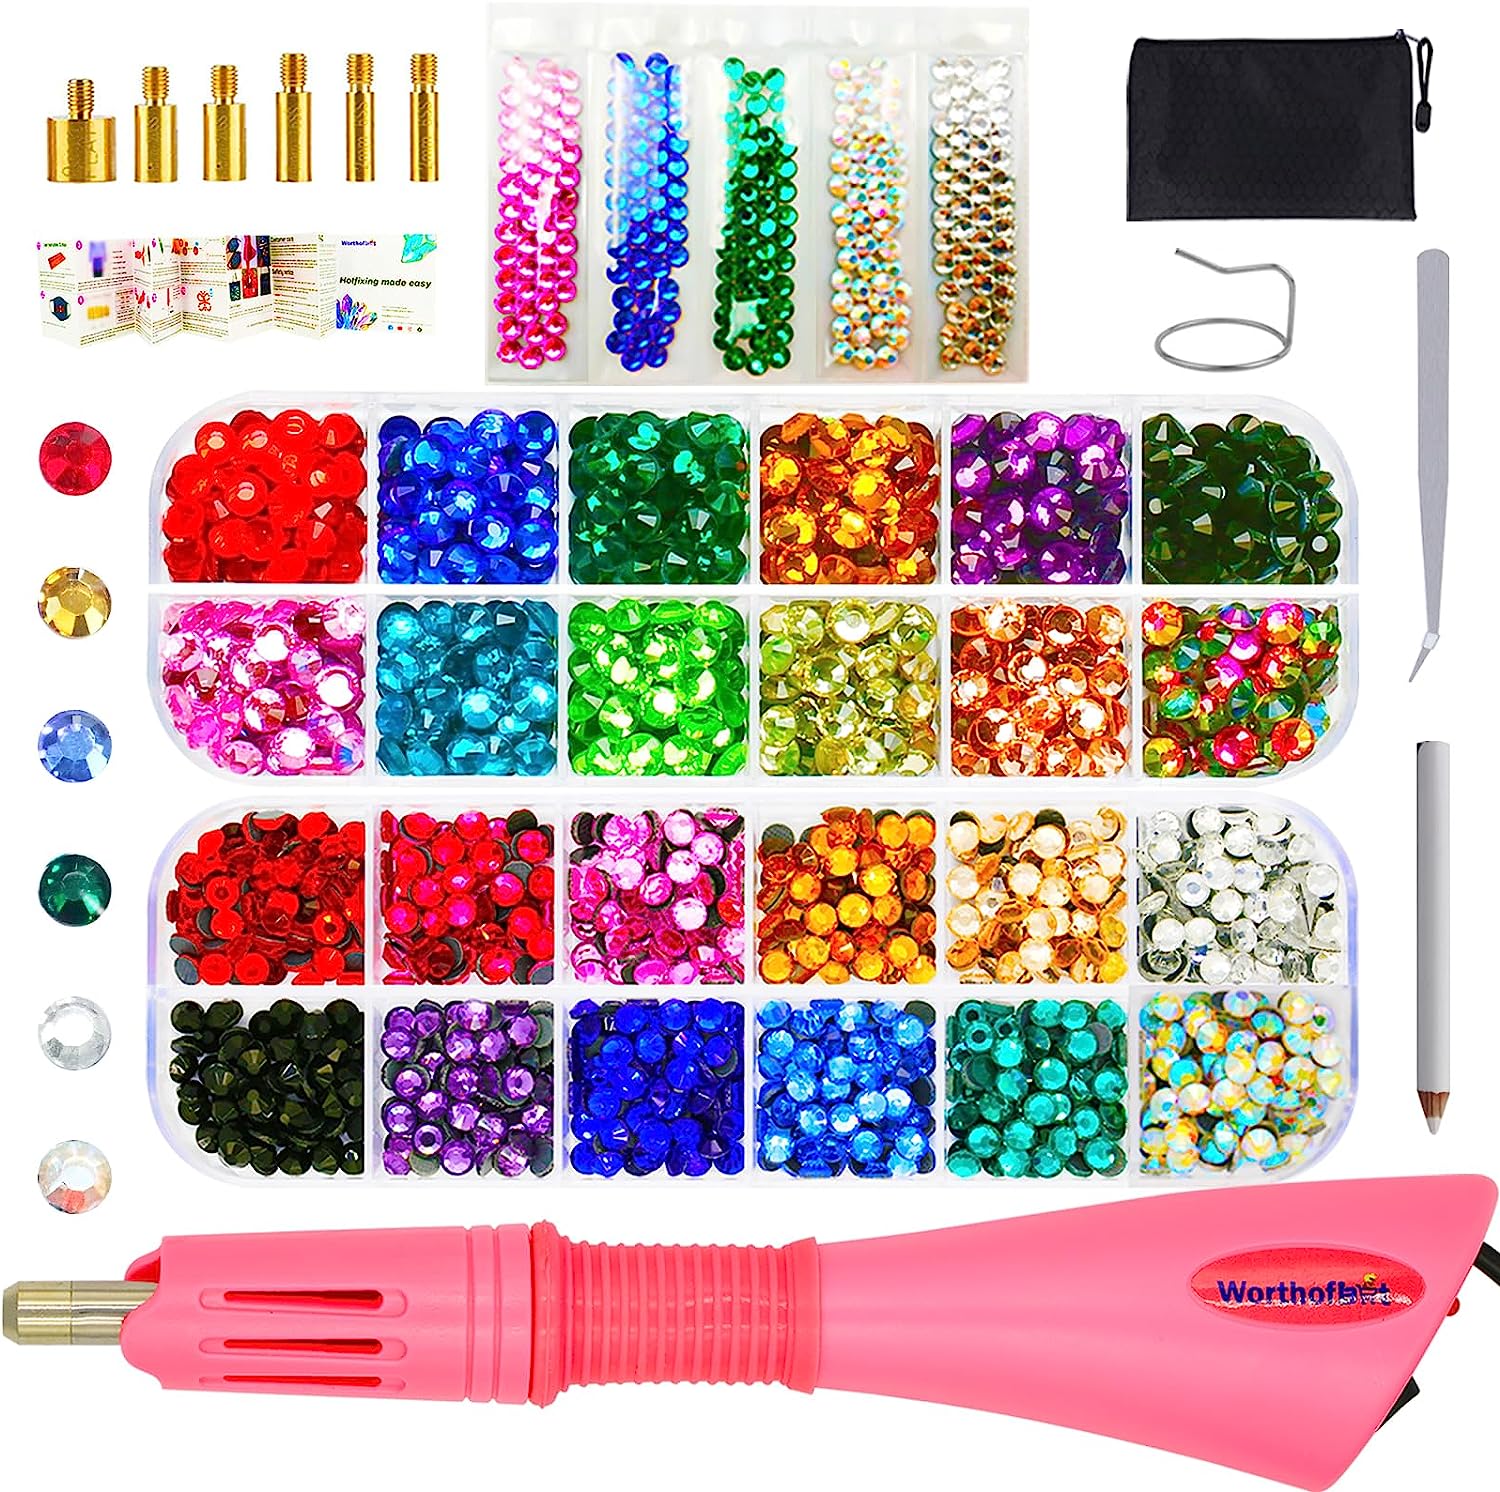 Bedazzler Kit with Rhinestones for Clothing, Hotfix [...]